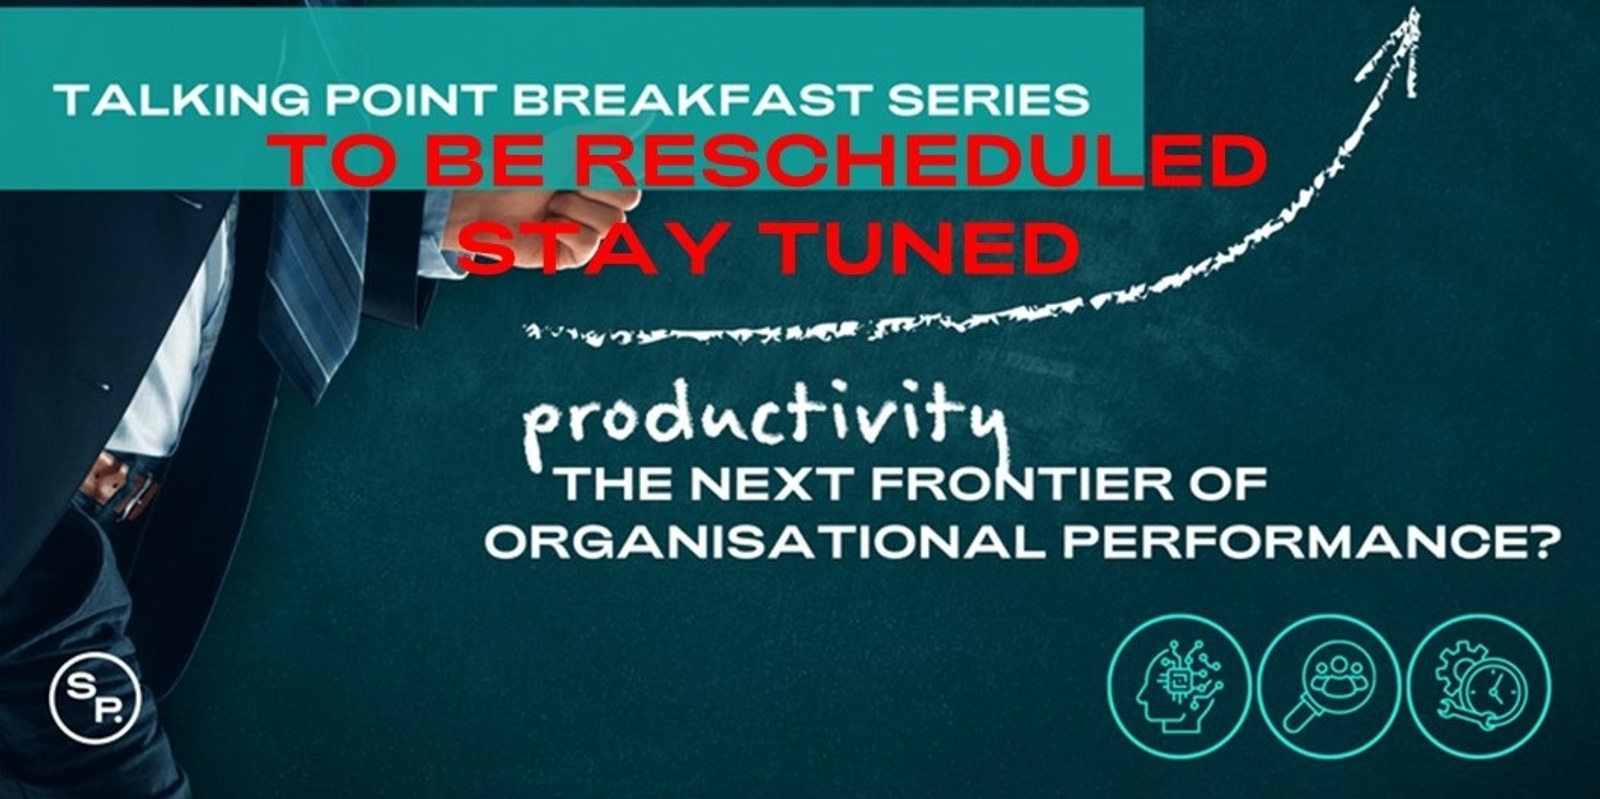 Banner image for Talking Point Breakfast Series - Productivity: The Next Frontier of Organisational Performance